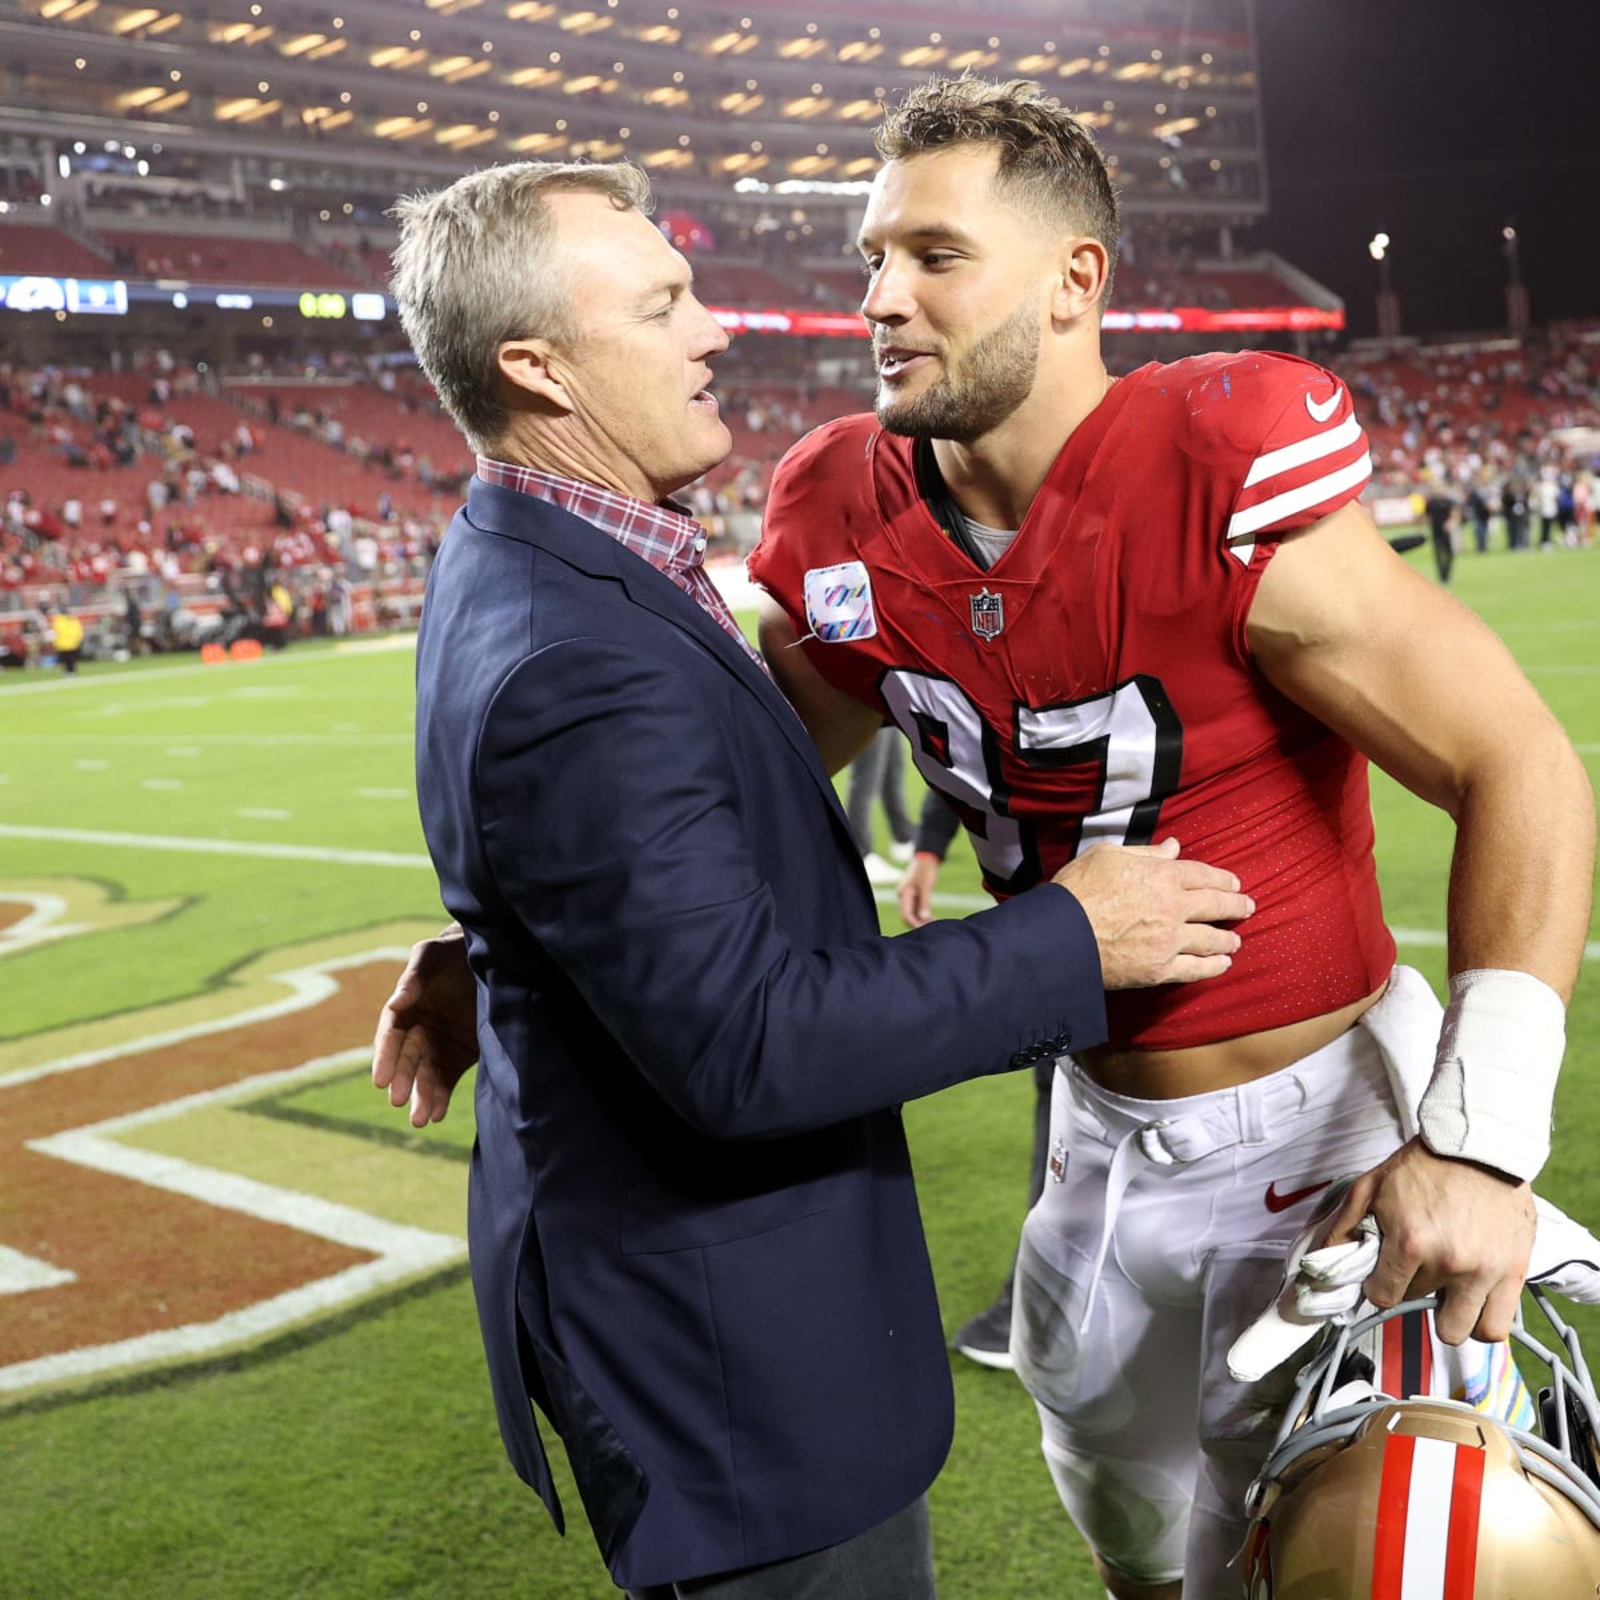 San Francisco 49ers Nick Bosa reportedly becomes highest paid NFL defensive  player ever